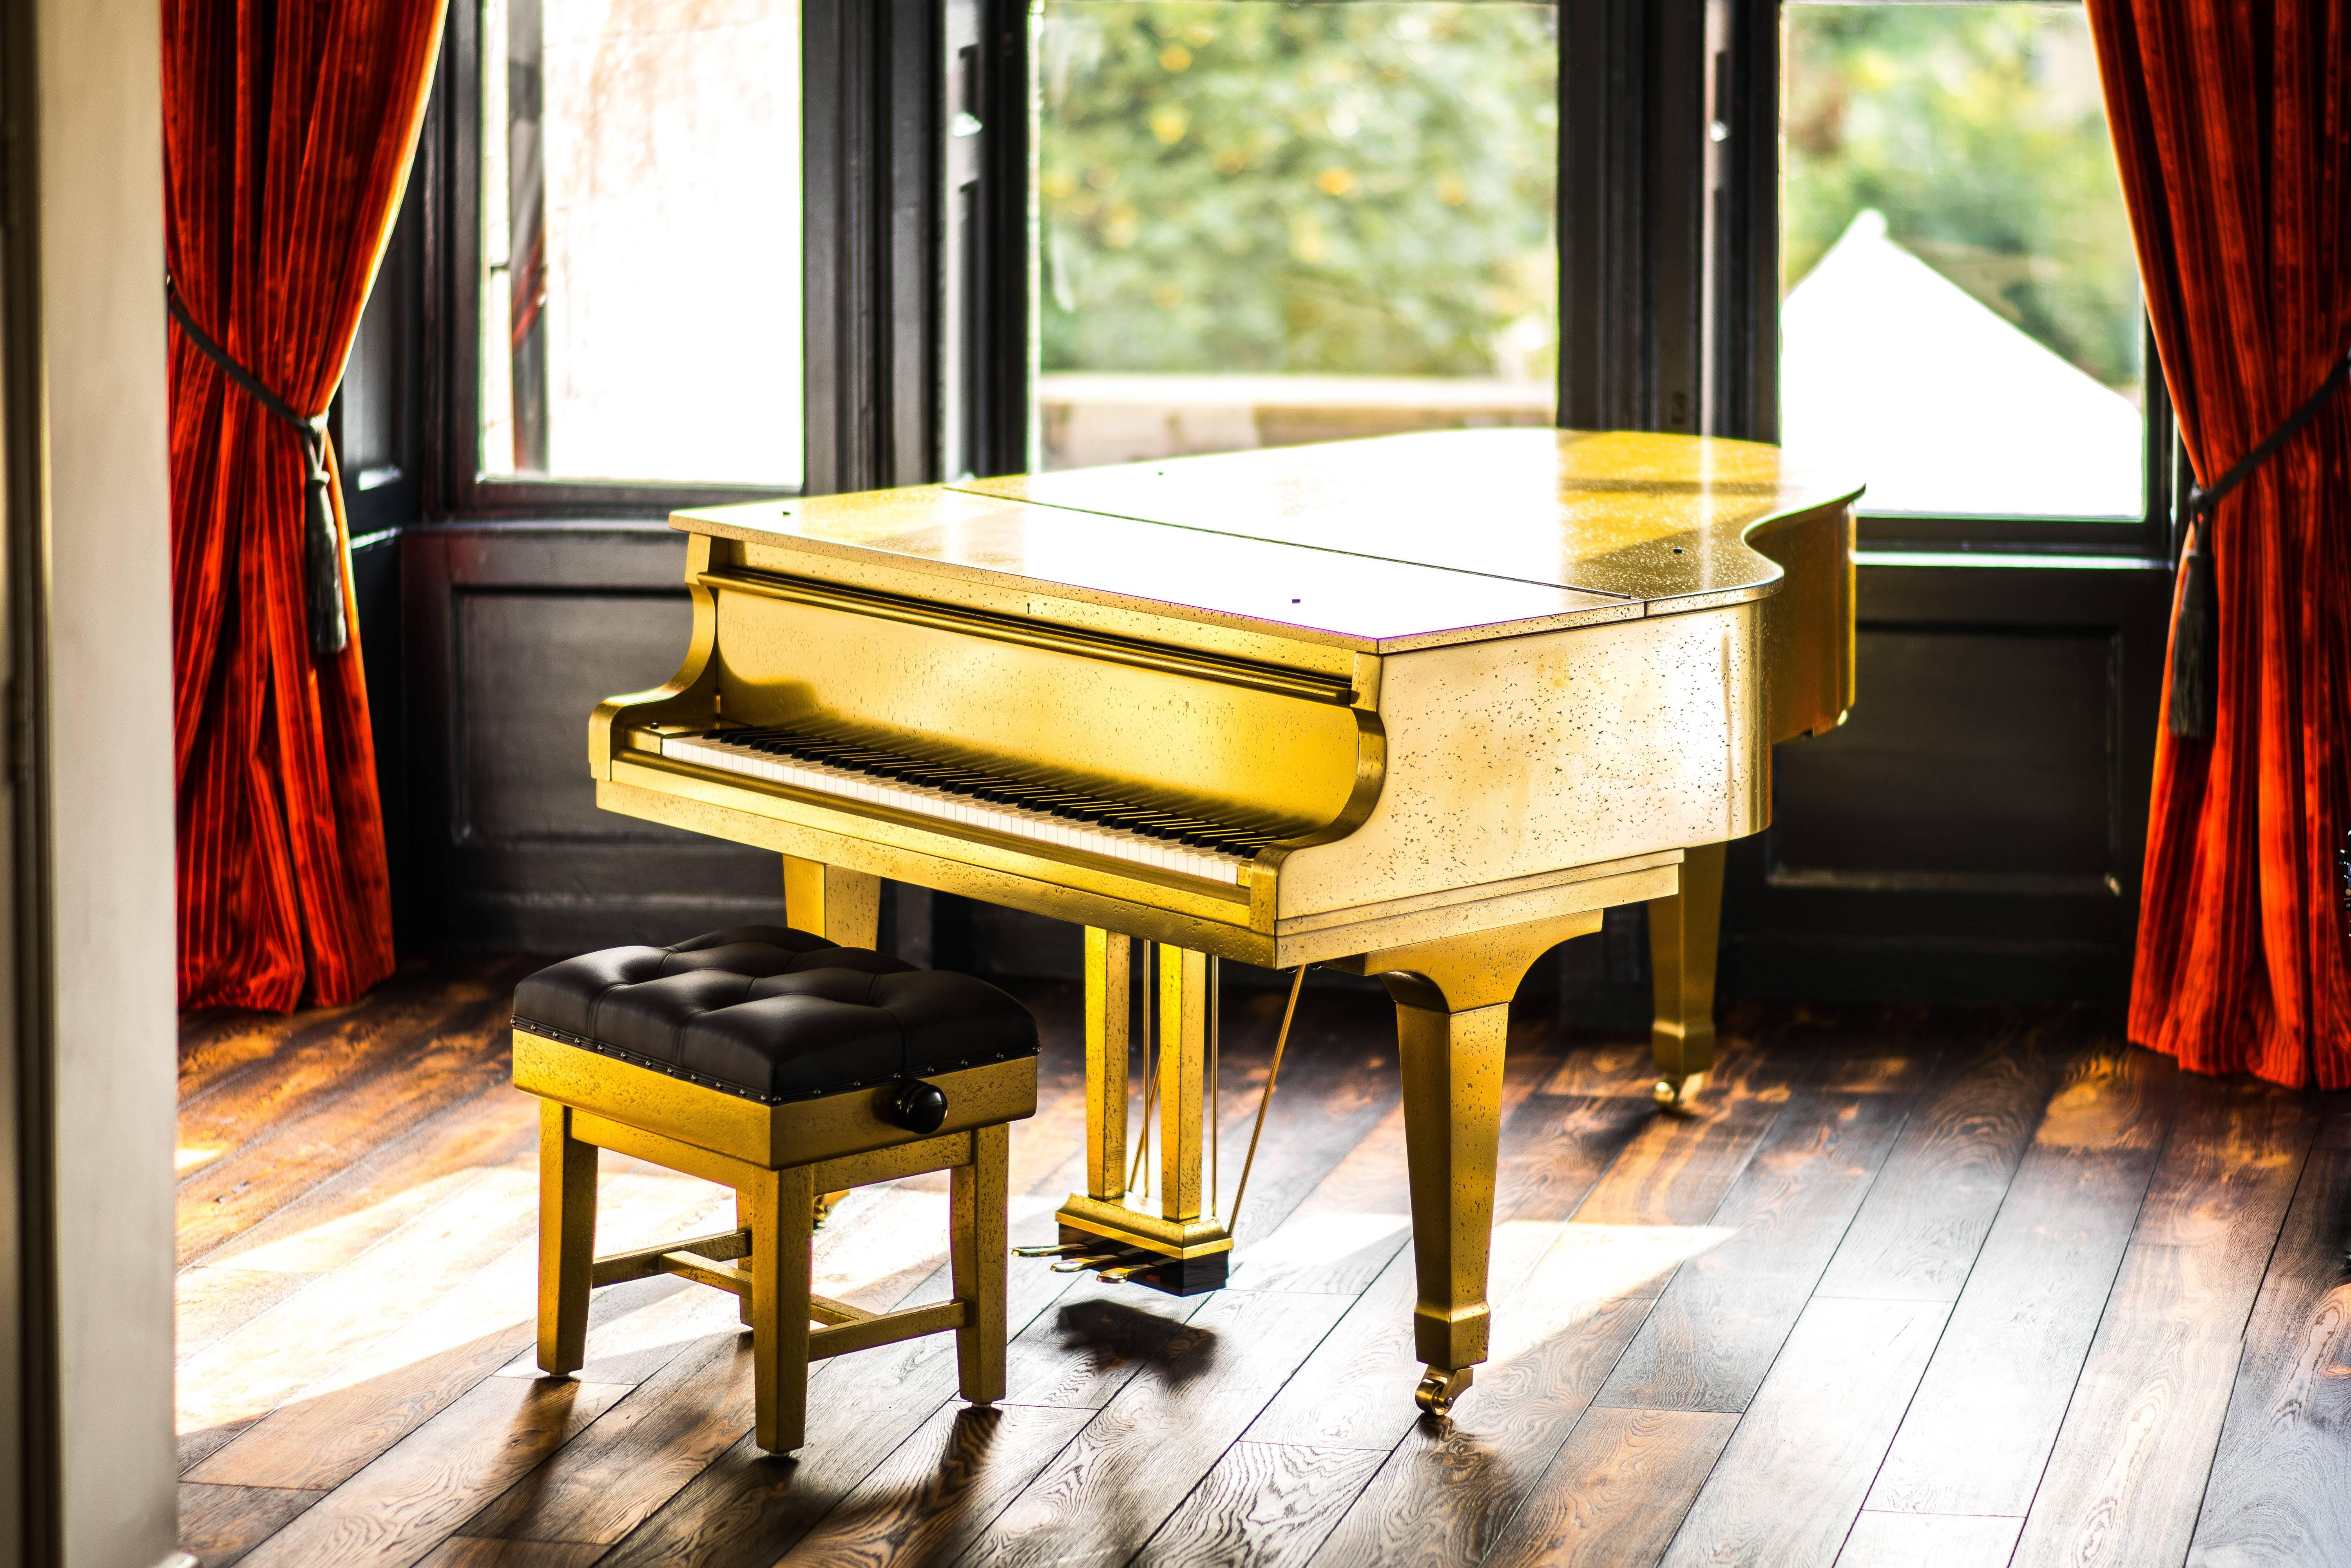 Japanese Bespoke Metal Coated Kawai RX-3 Grand Piano and Leather Concert Stool For Sale